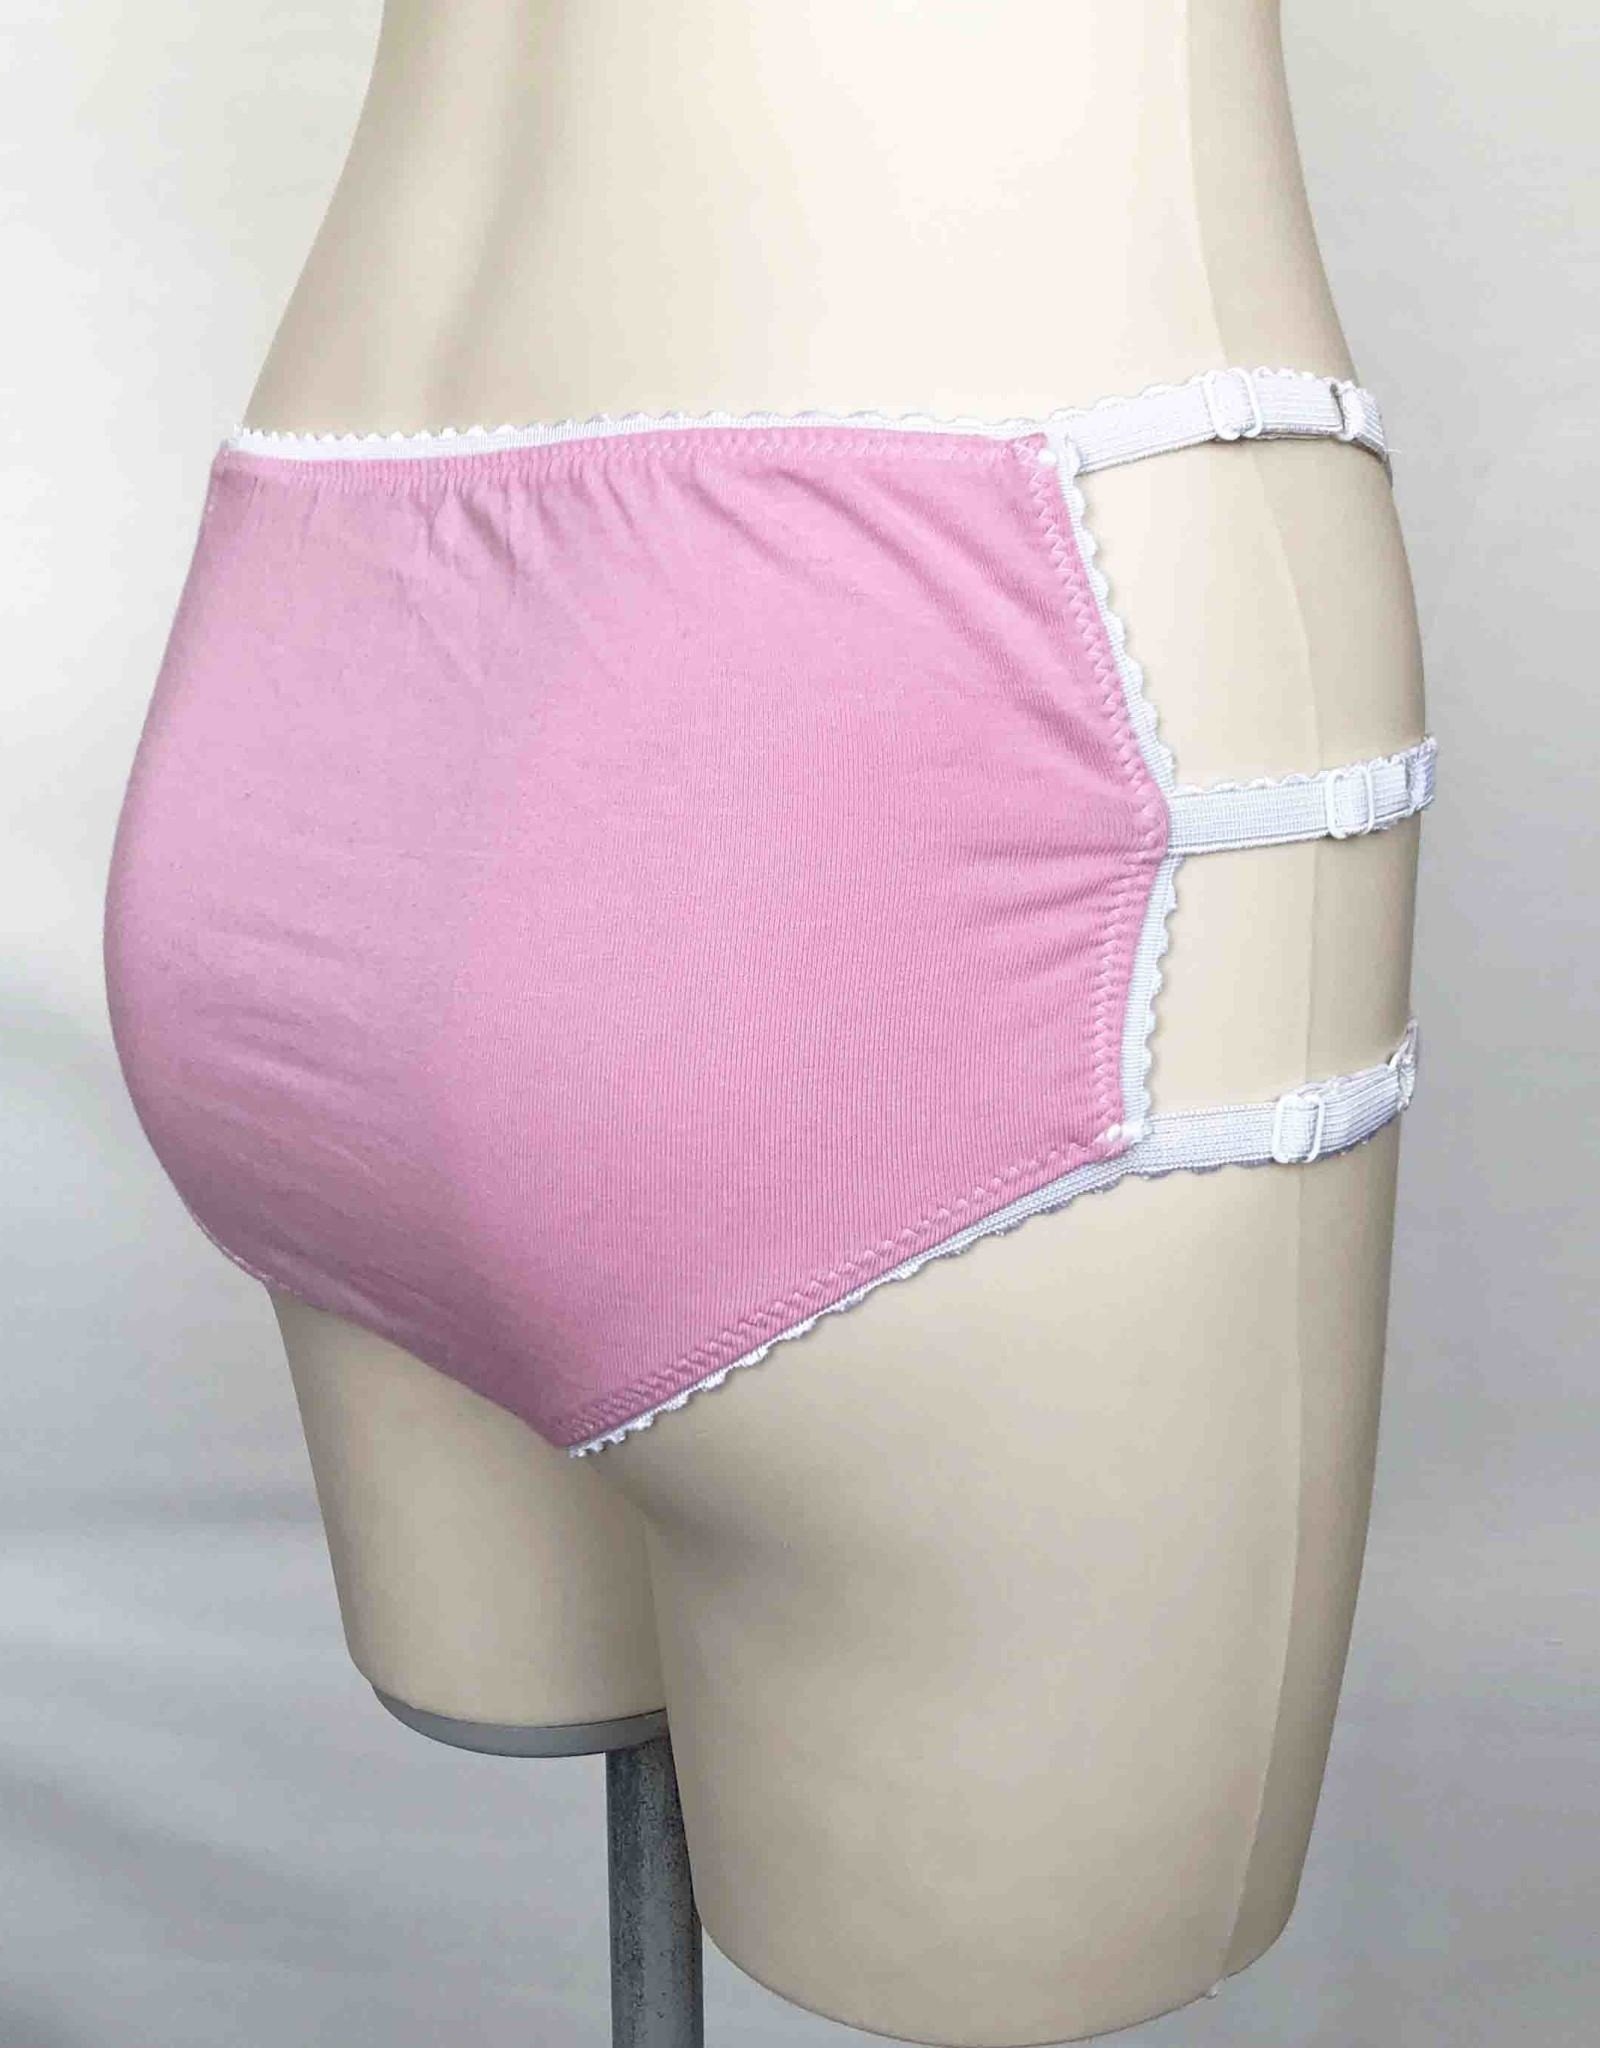 Devil May Wear Cage Panties. Bamboo blend. Adjustable size tabs. Mid Rise. Pink/White